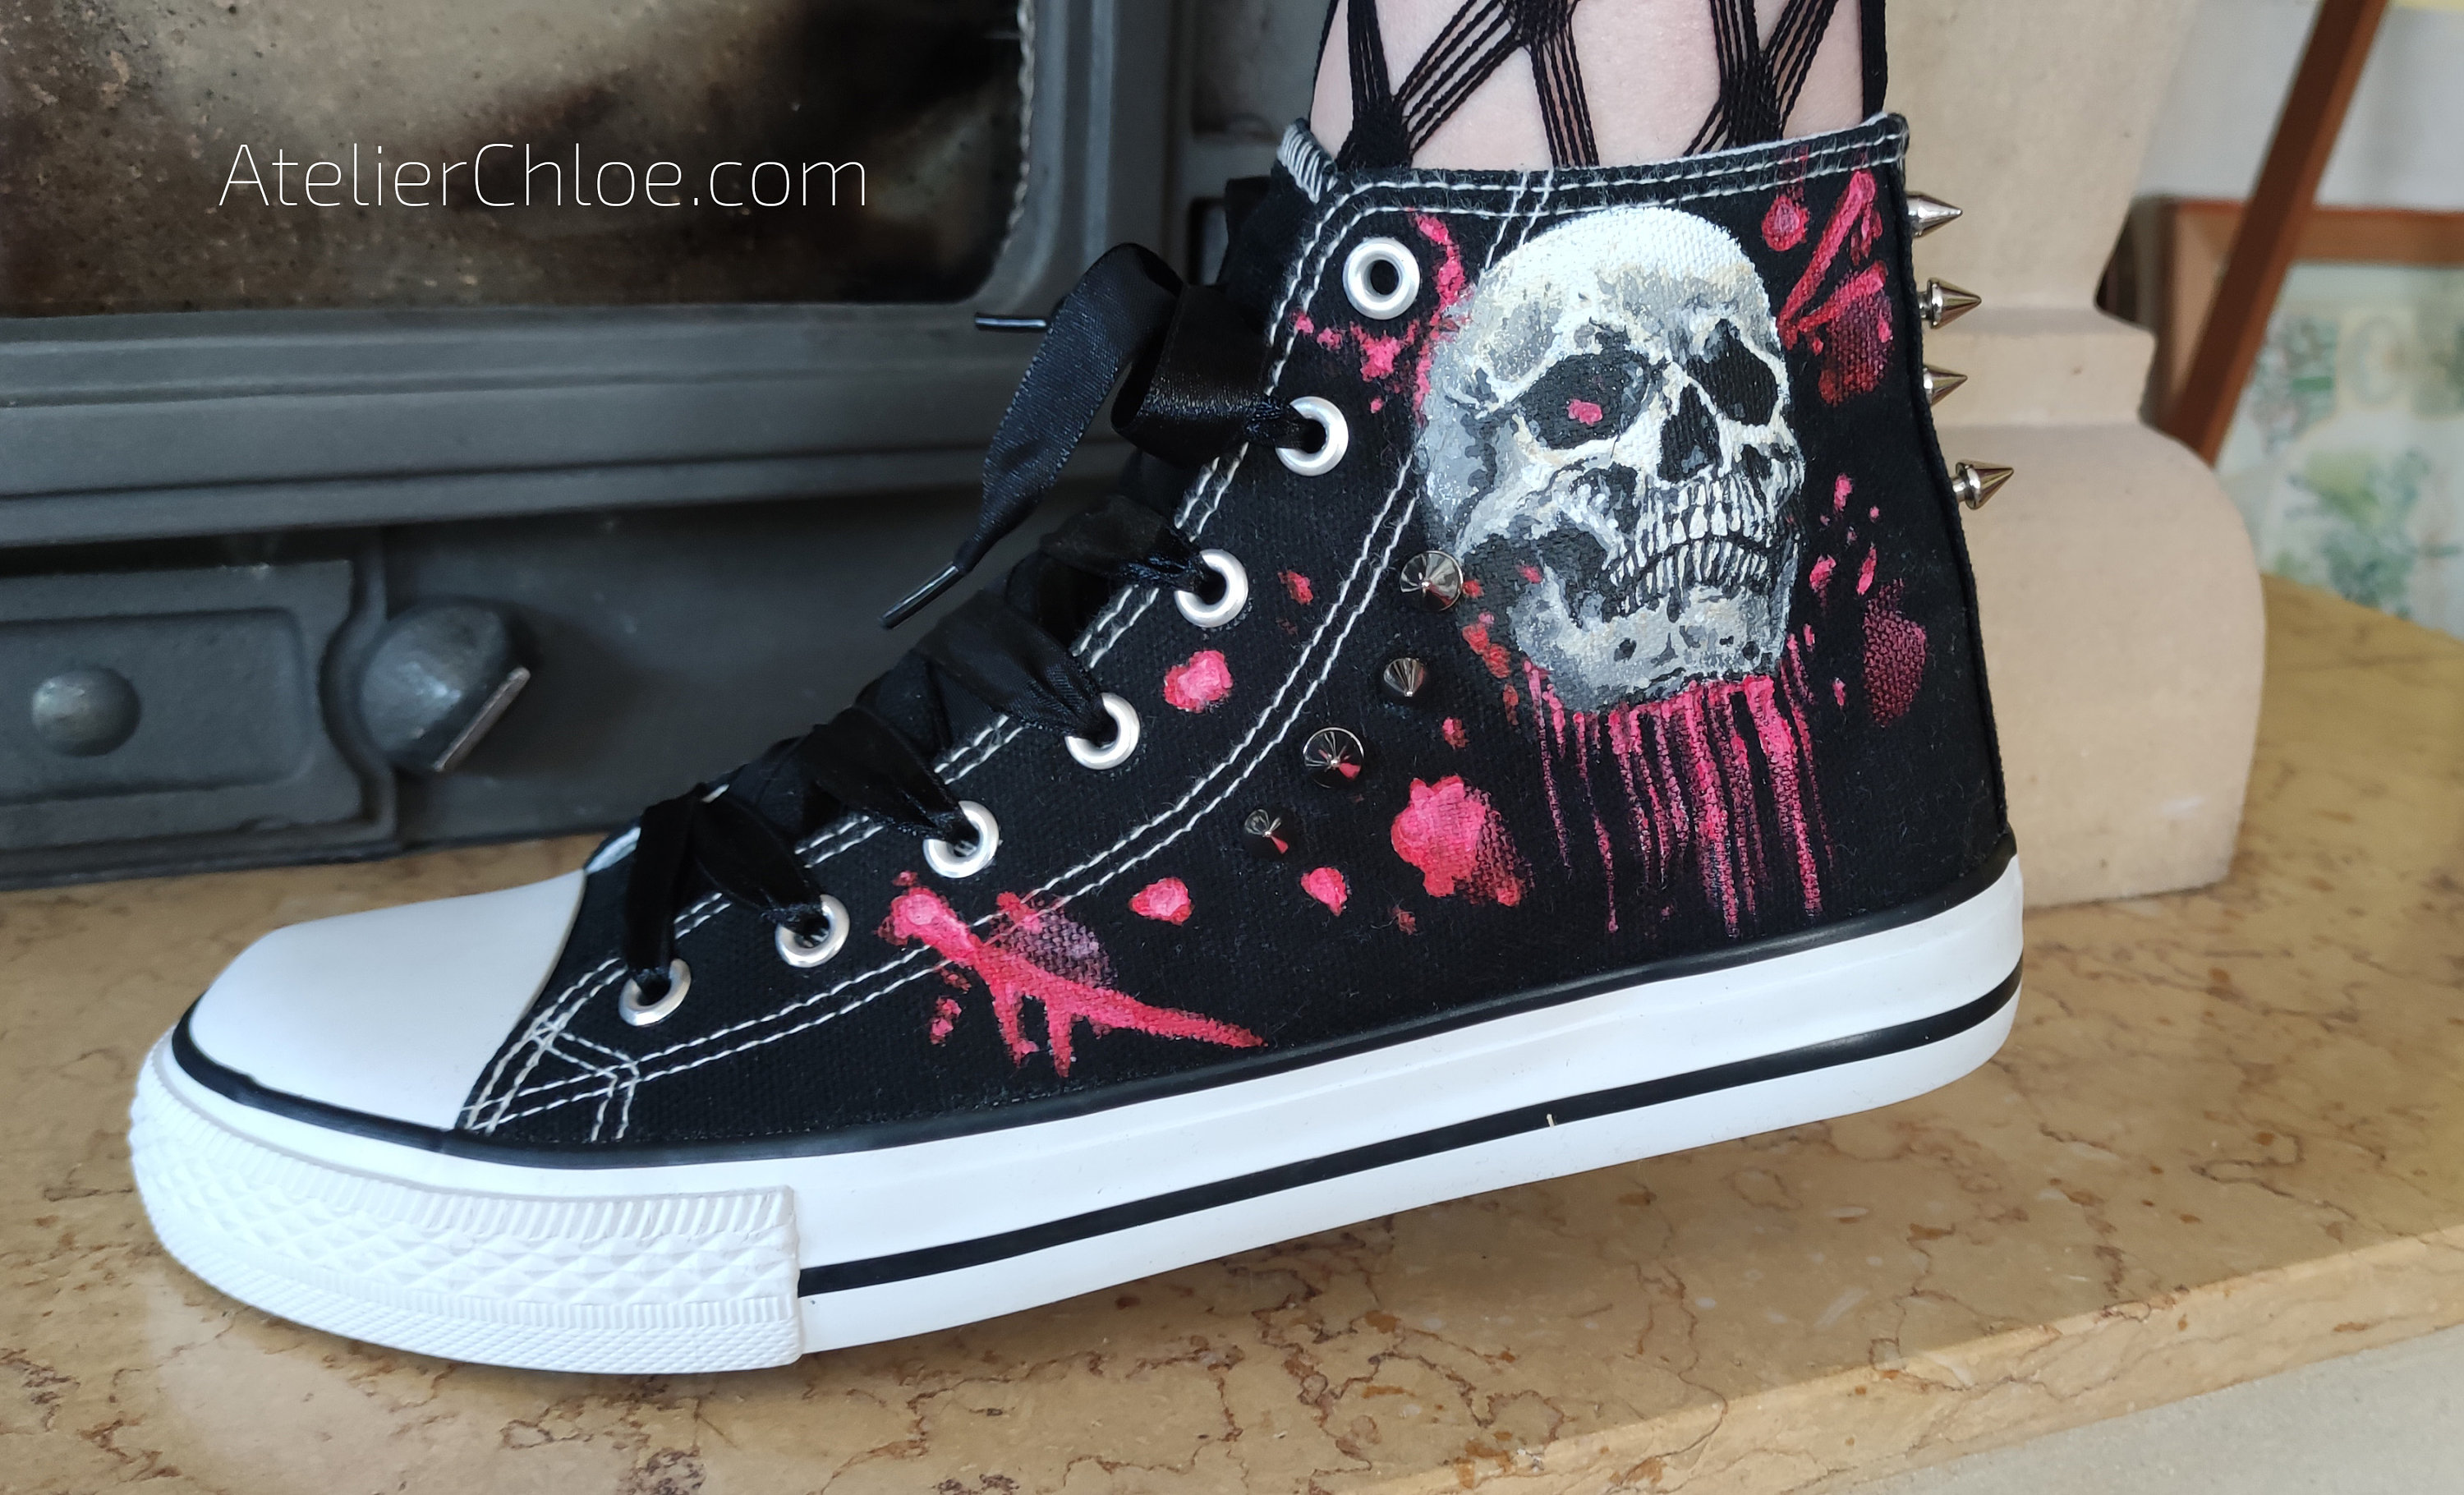 editorial Espacio cibernético Heredero Studded Converse Shoes Blood Splashed Sneakers Skull Shoes - Etsy Israel